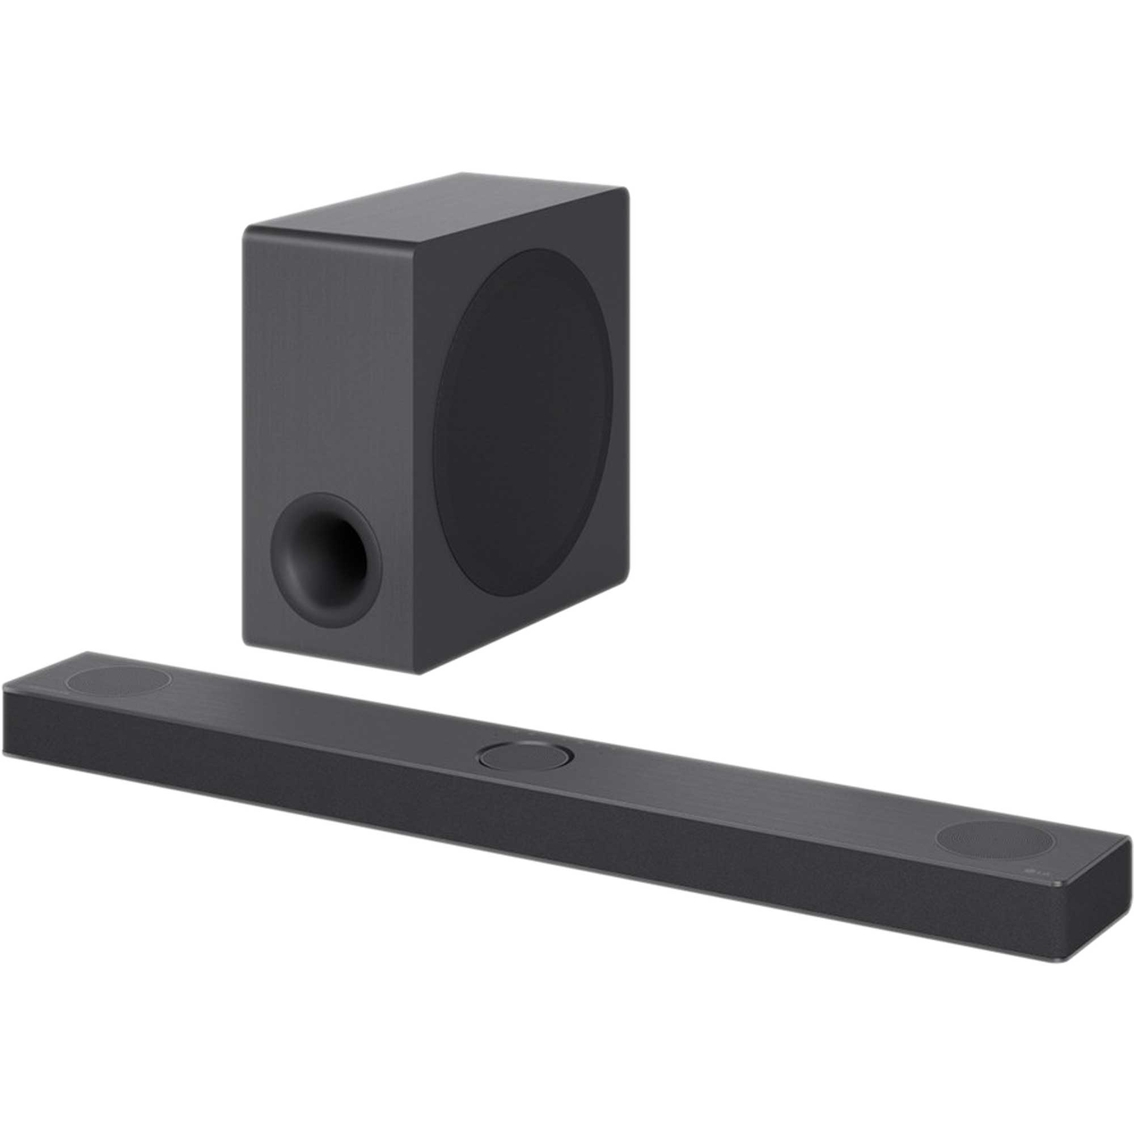 LG S80QY 3.1.2 Channel 480W High Res Sound Bar with Dolby Atmos and Apple Airplay 2 - Image 2 of 8